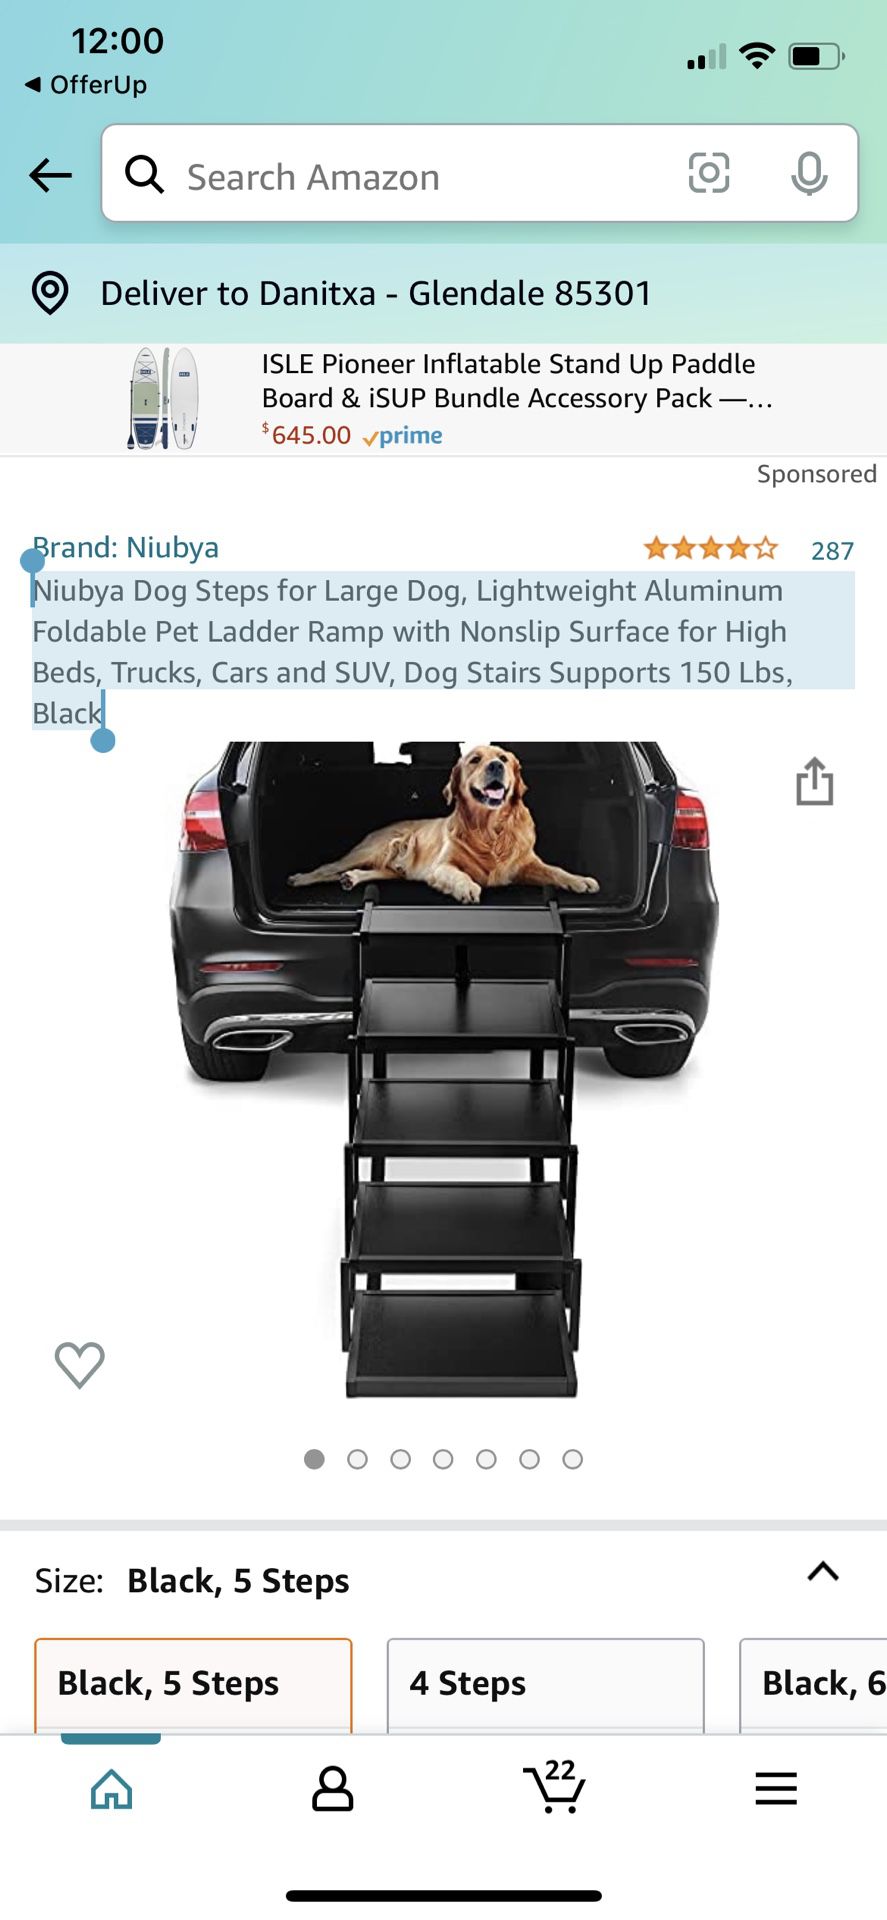 Niubya Dog Steps for Large Dog, Lightweight Aluminum Foldable Pet Ladder Ramp with Nonslip Surface for High Beds, Trucks, Cars and SUV, Dog Stairs Sup